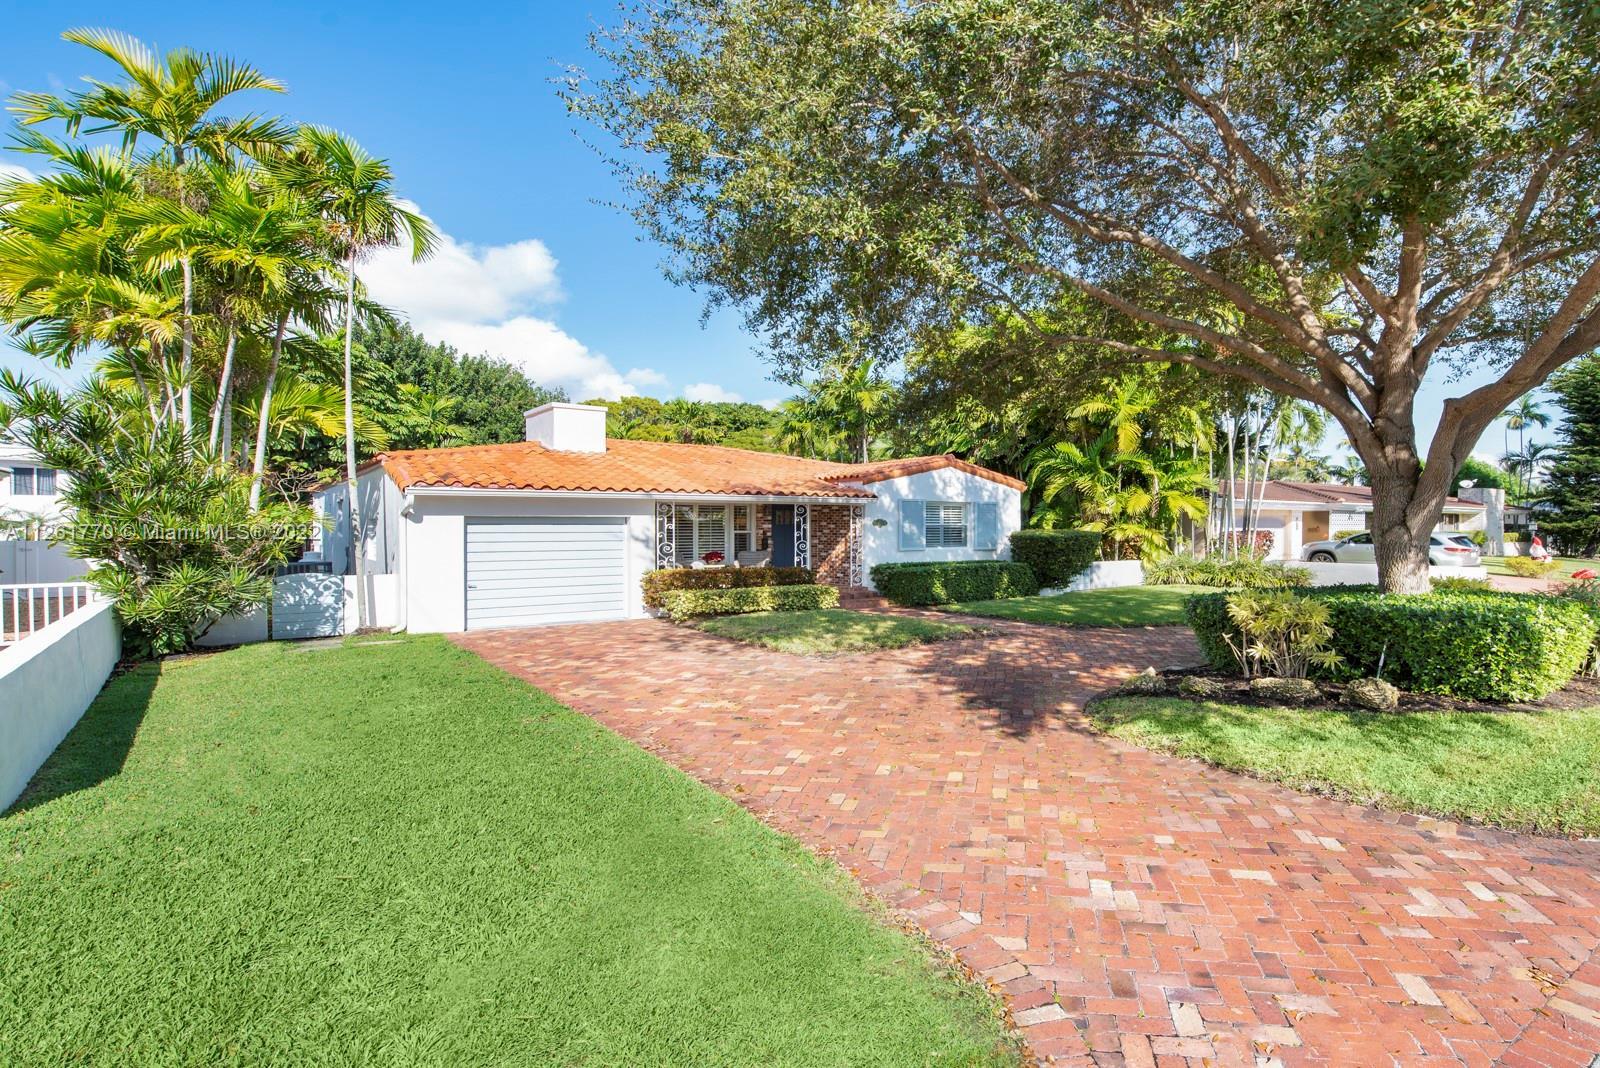 Charming home in prime location within Miami Shores. This 1940's classic offers a large family room 